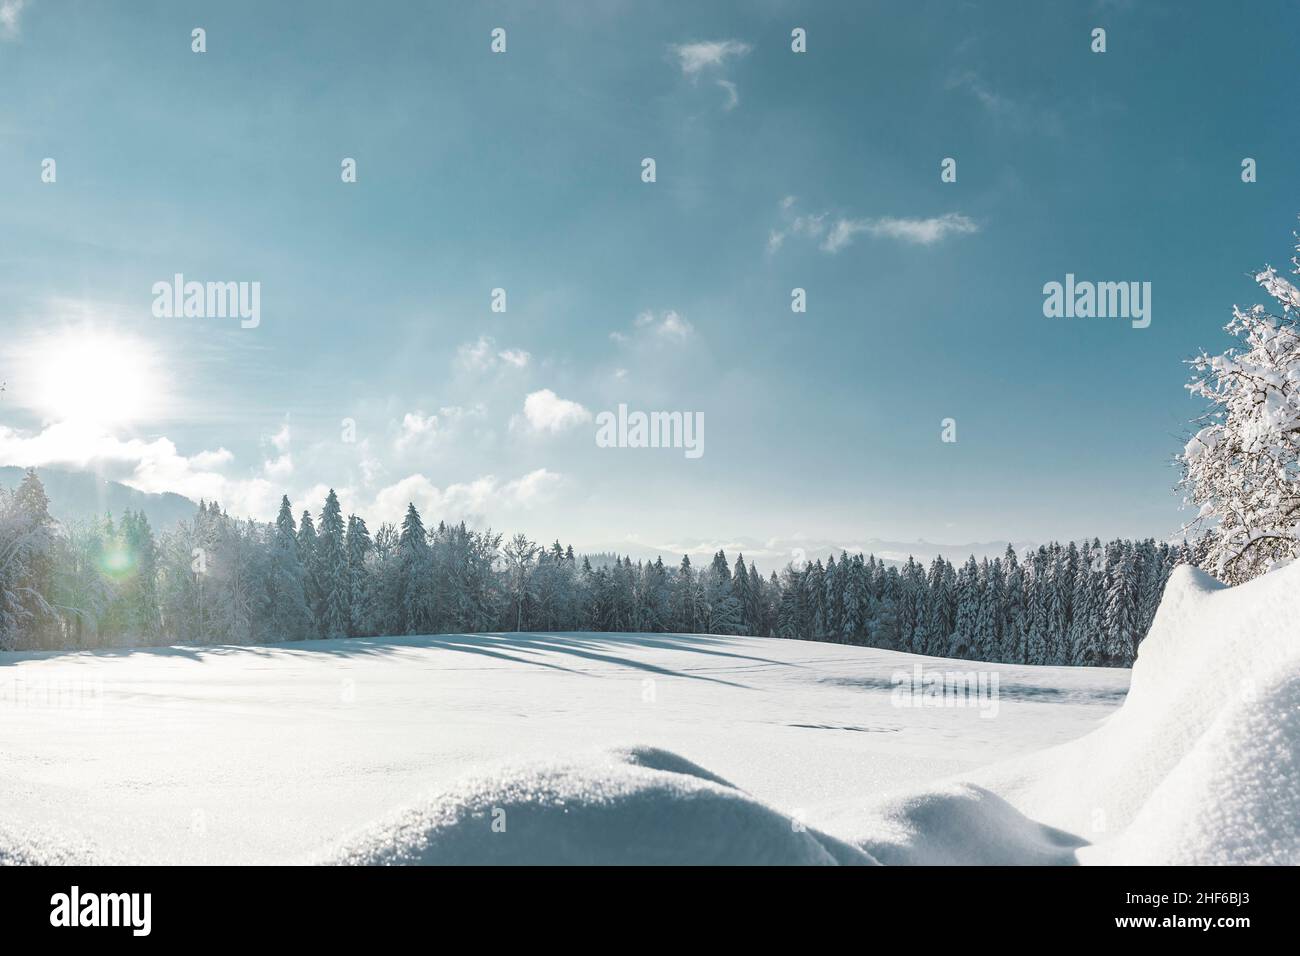 snowy winter landscape with blue sky and fir trees Stock Photo